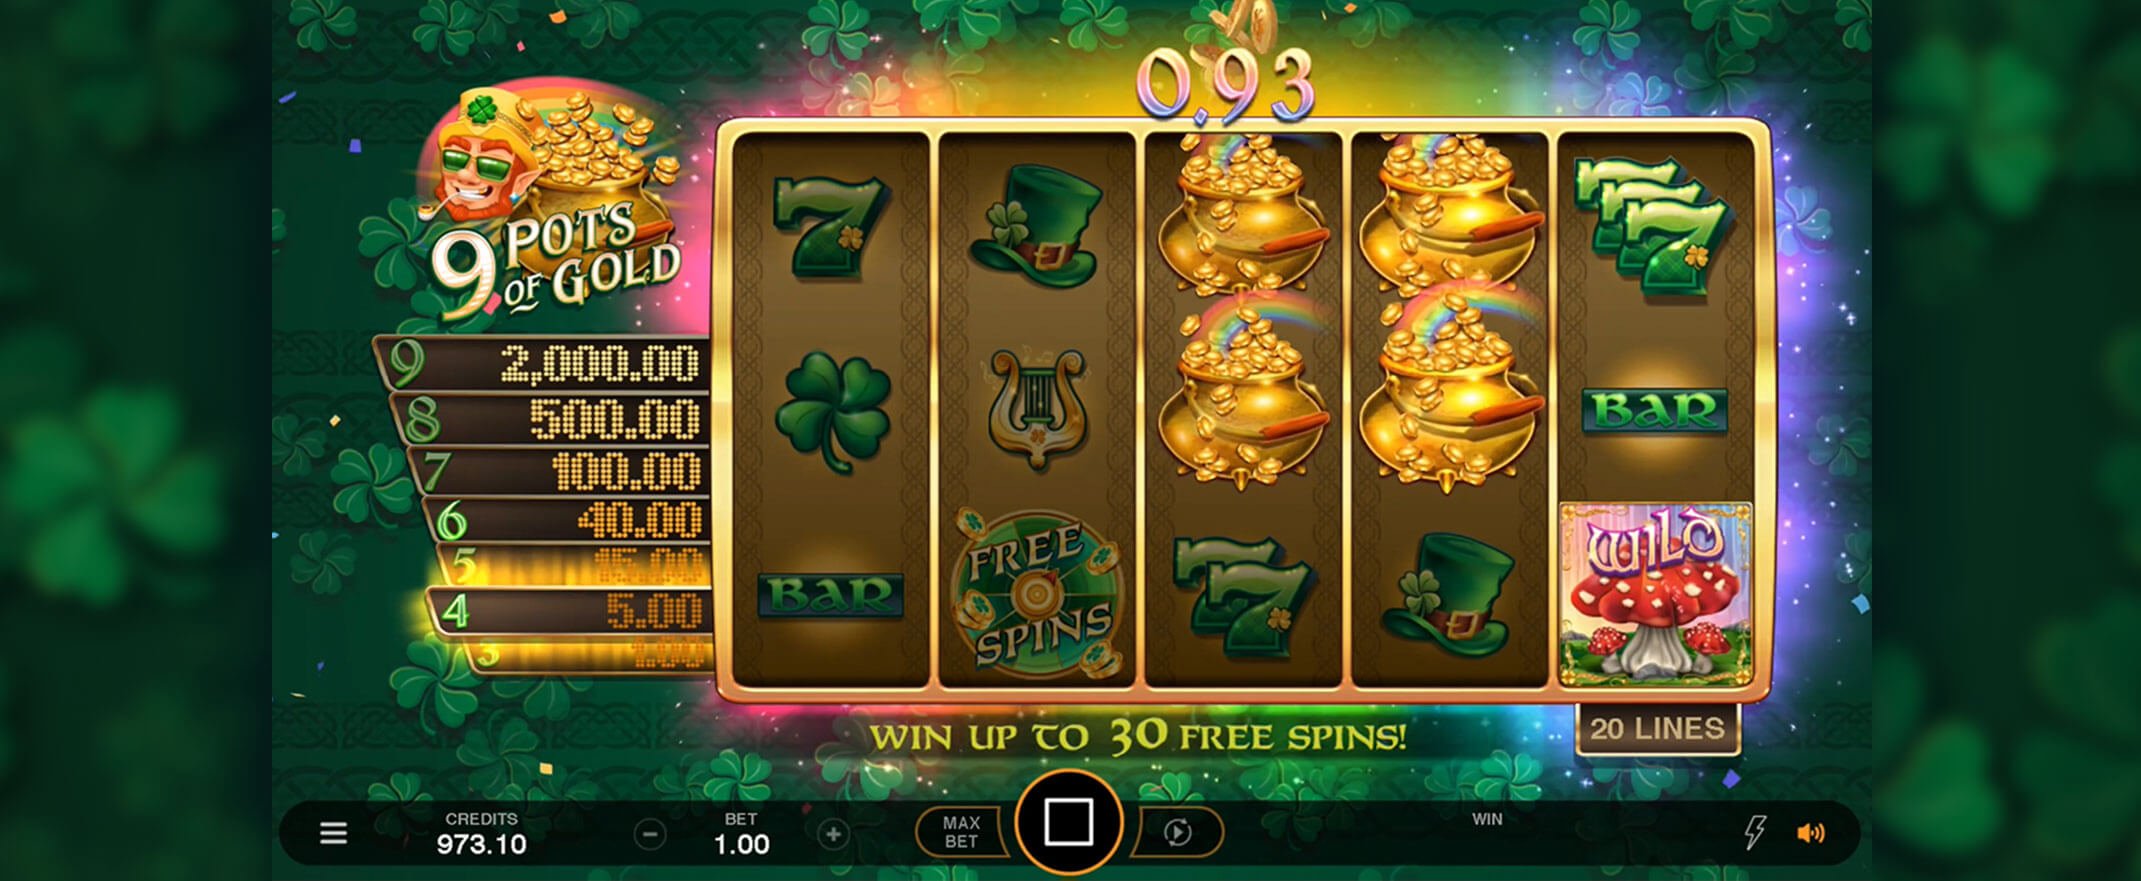 9 pots of gold slot gameplay